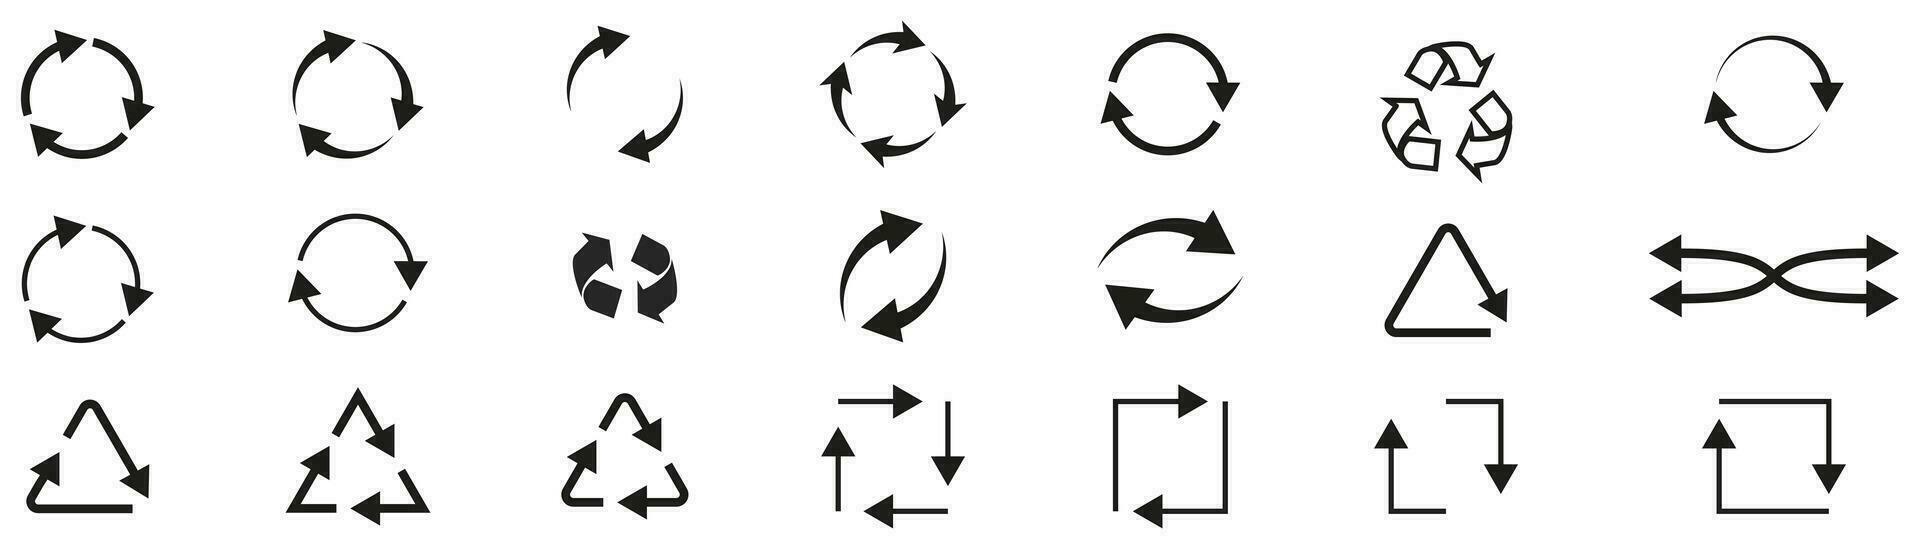 Recycle arrows in black. Loading arrow pictograms. Circular rotation symbol. Recycle sign. Refresh icons collection. Repeating loop pictogram. Vector EPS 10